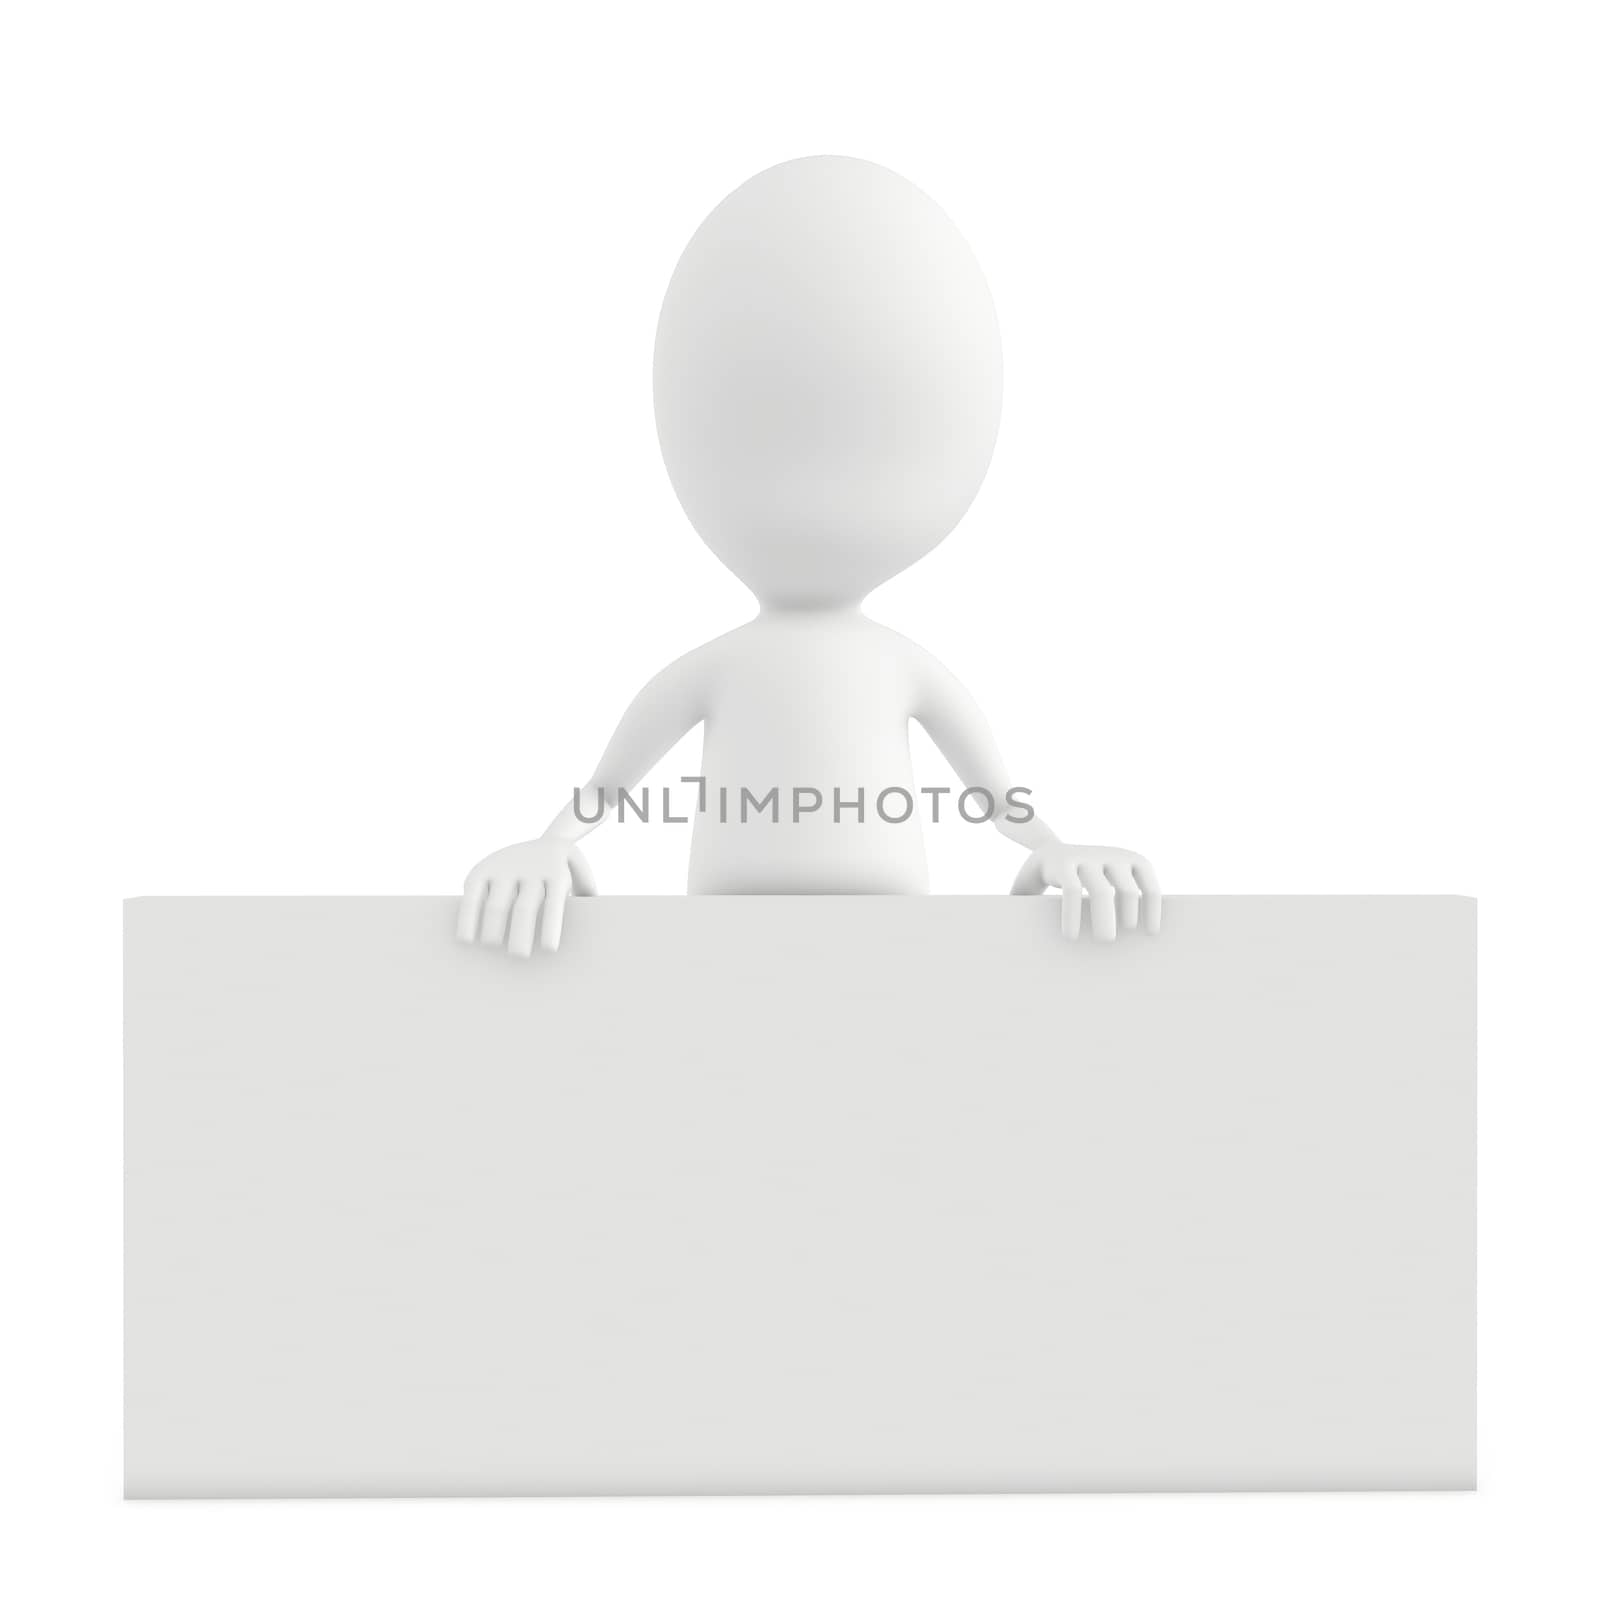 3d character holding a white blank card - 3d rendering